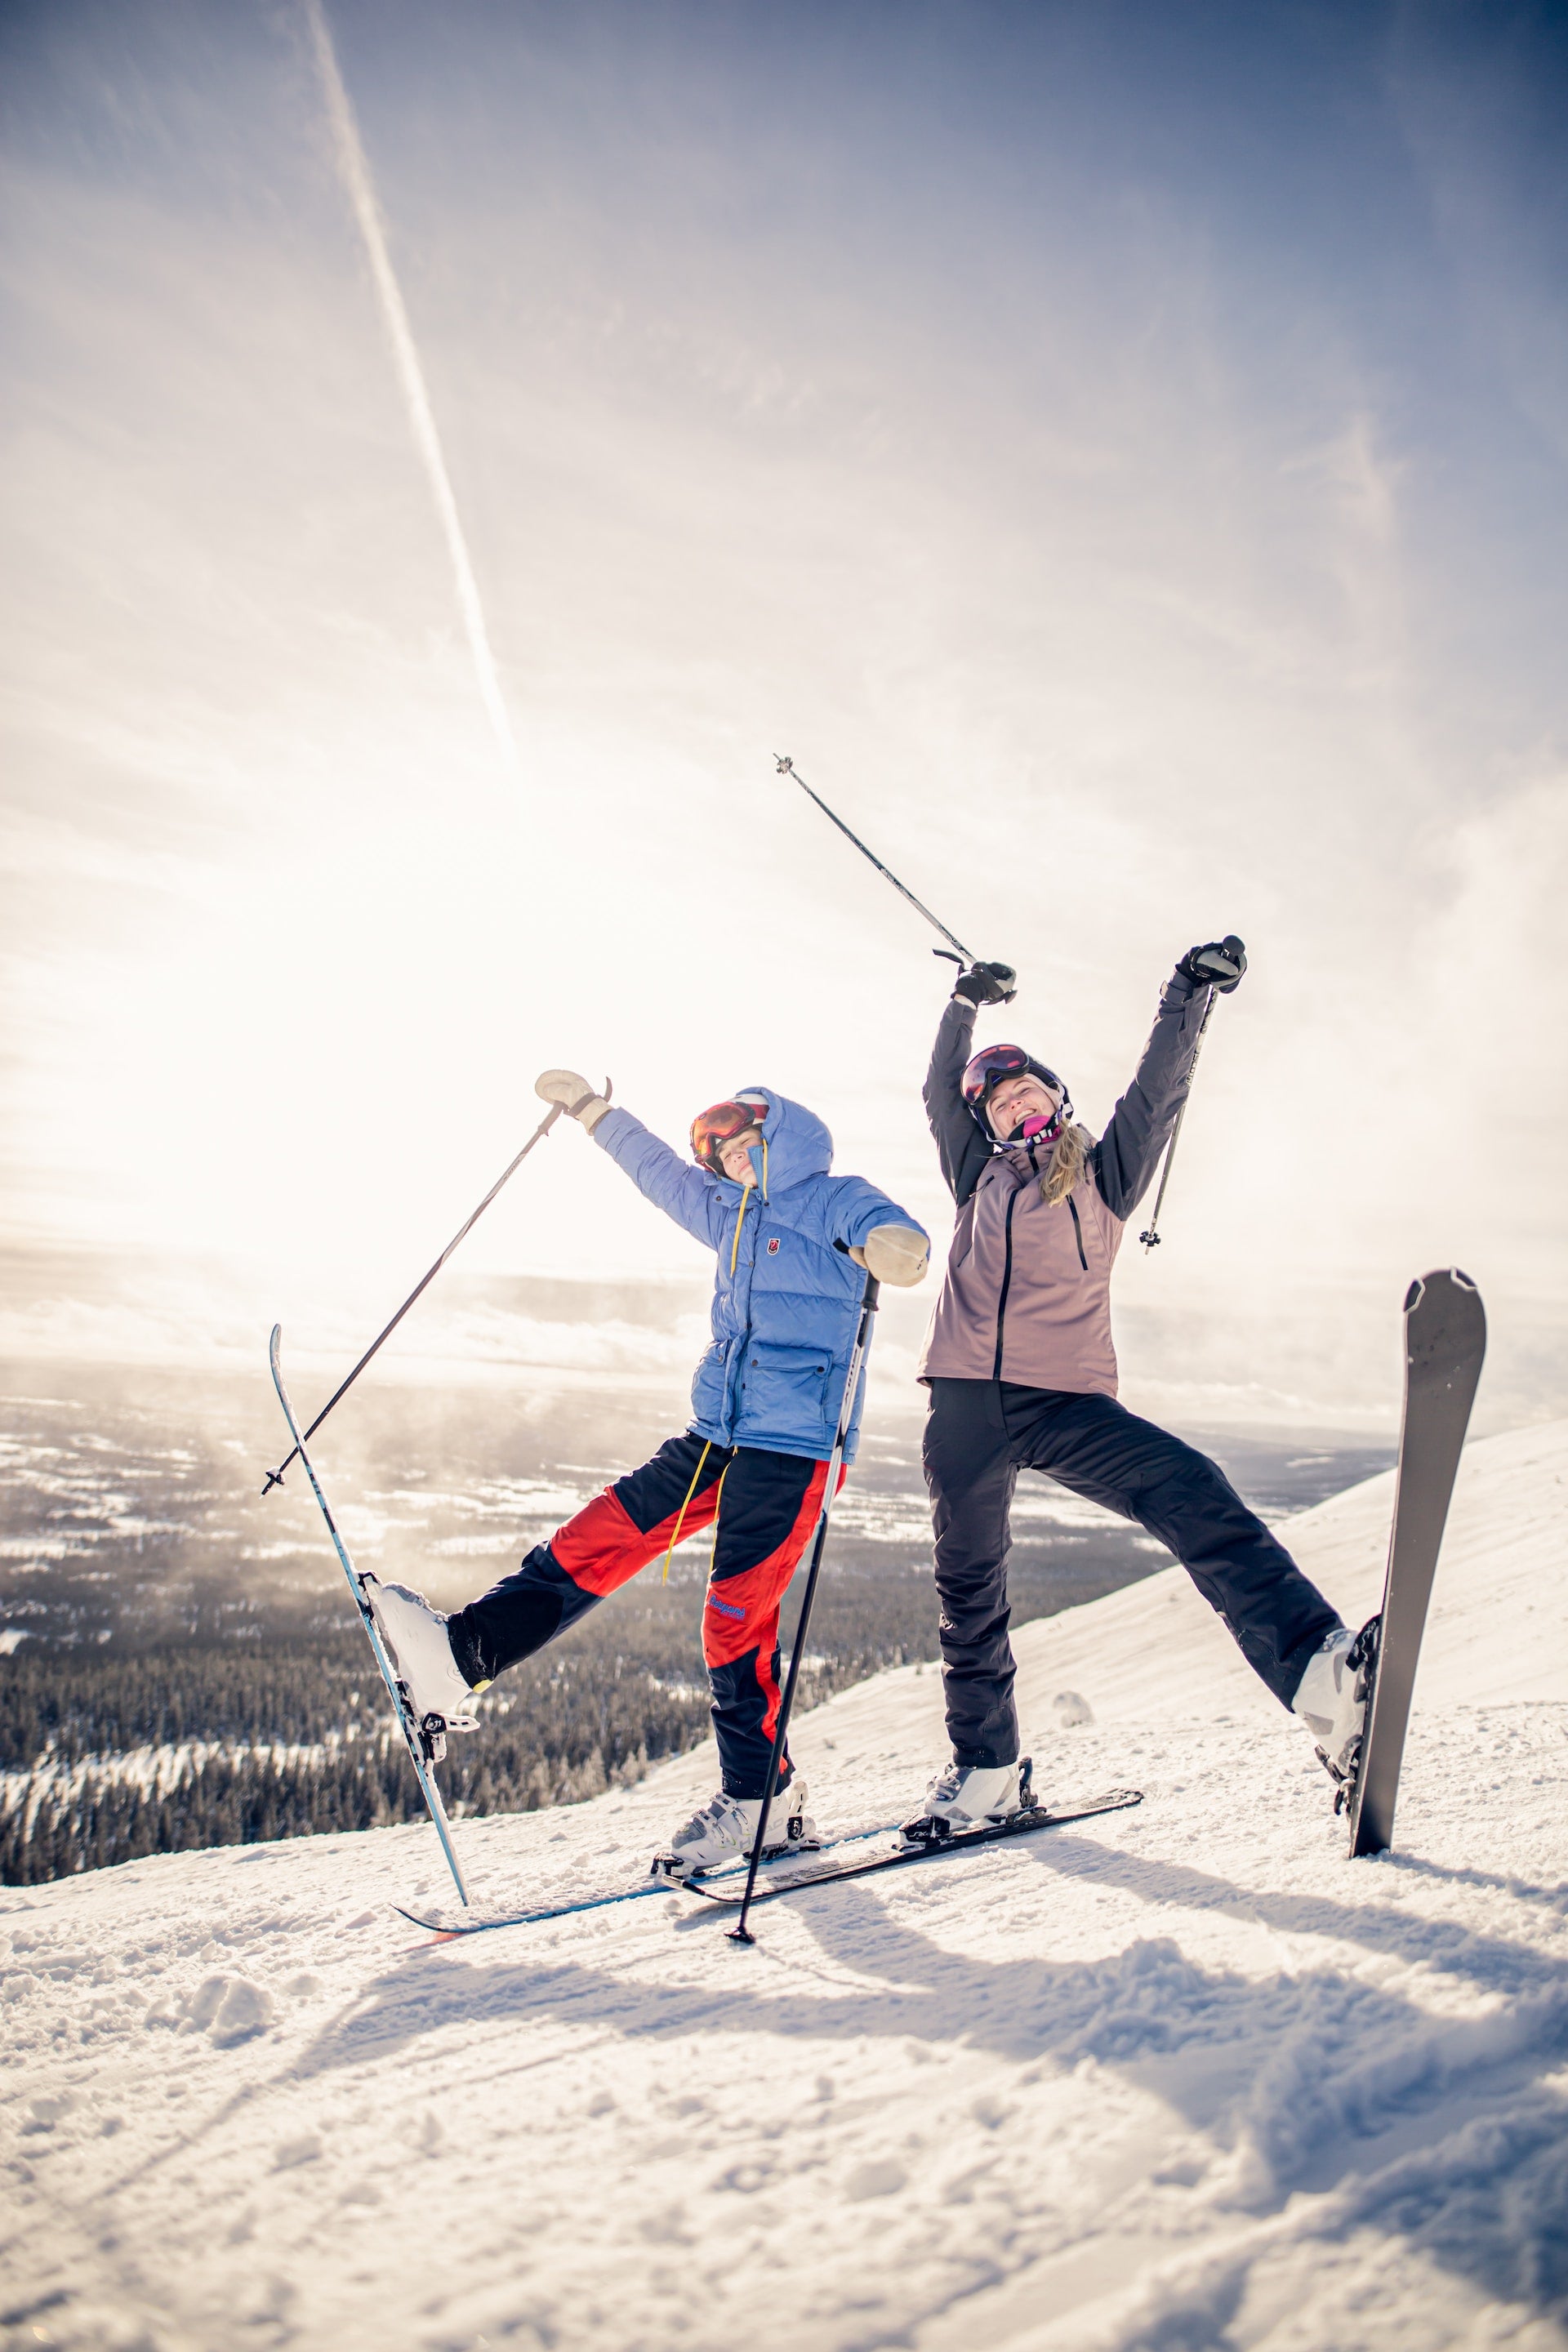 Stay Stylish and Cozy: Winter Vacation Outfit Ideas with Leggings for Skiing and More!